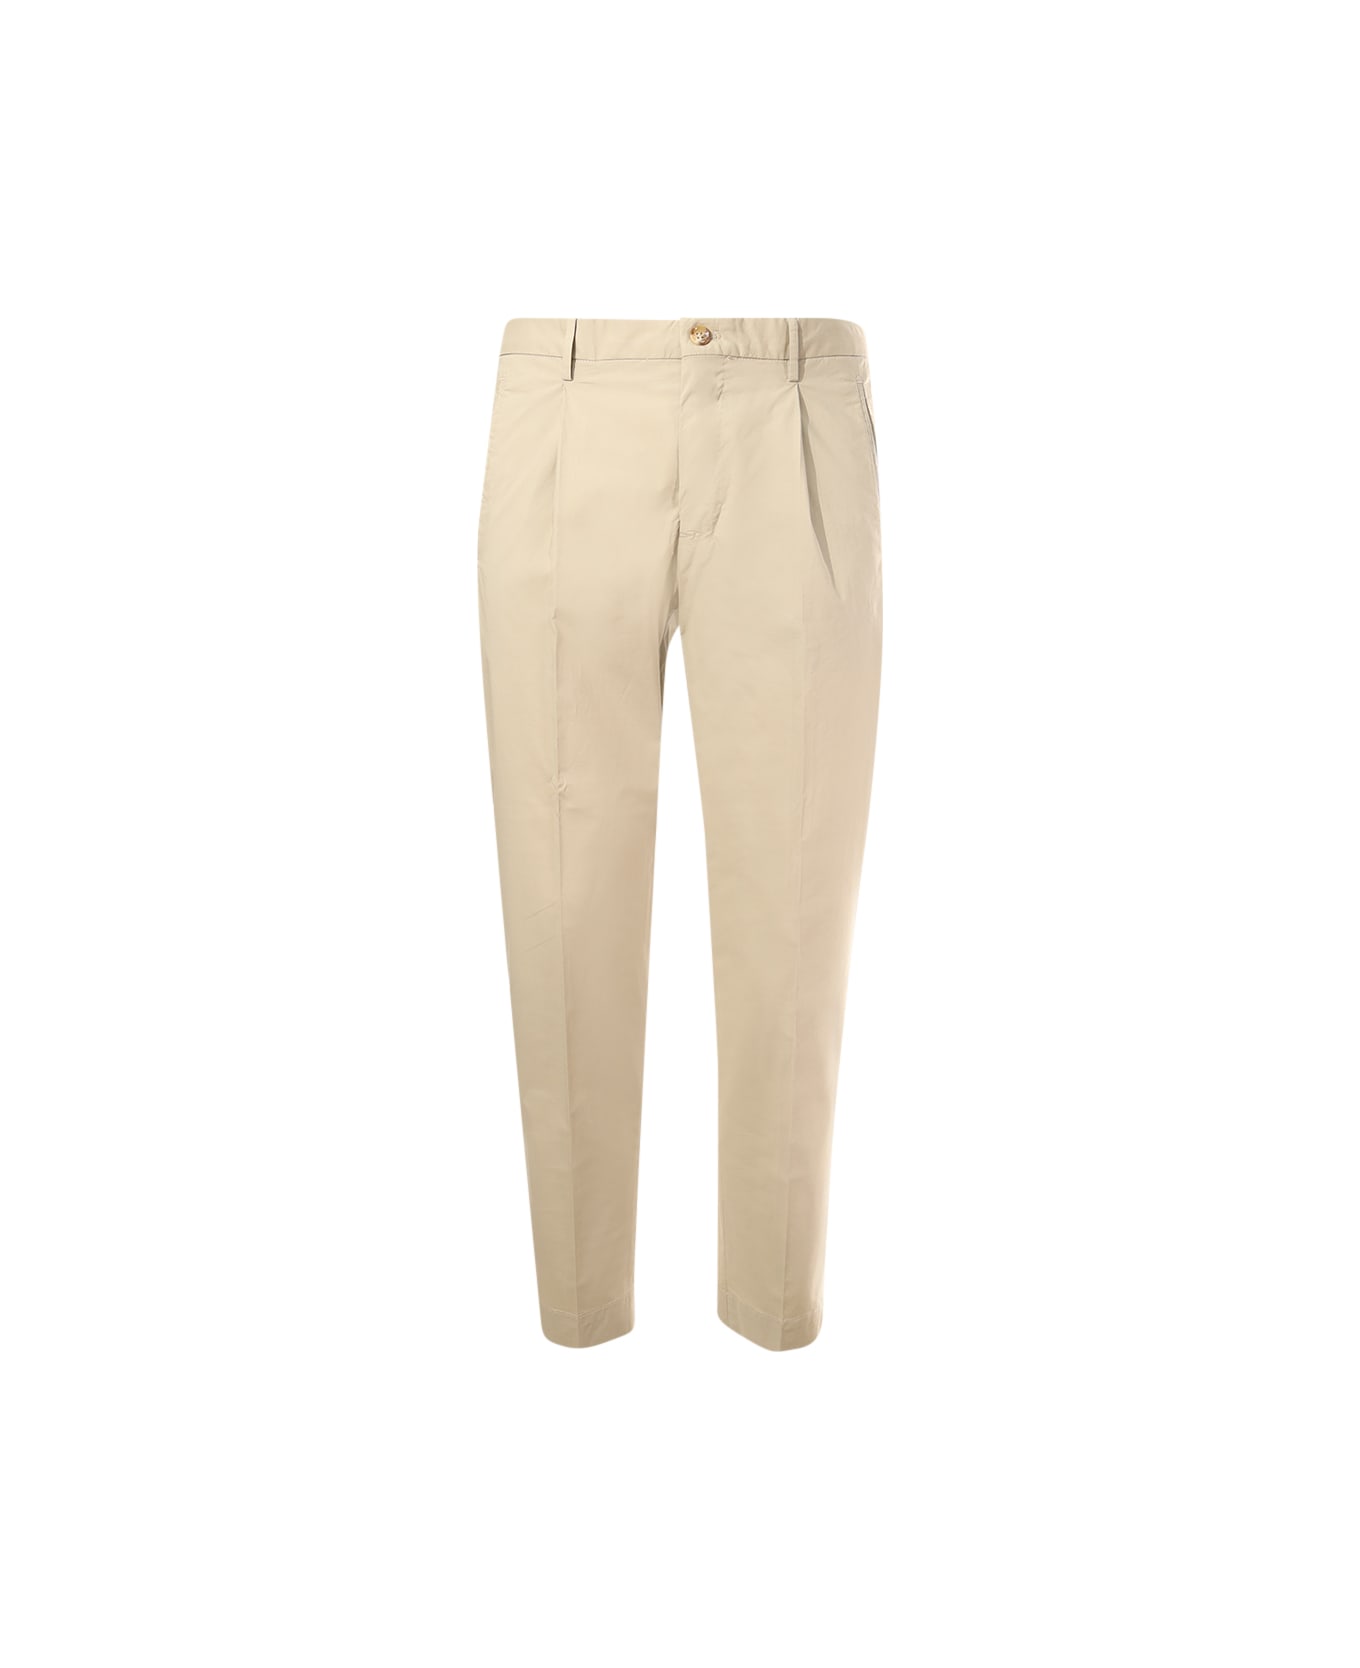 Incotex Trousers With Pleats - Beige ボトムス